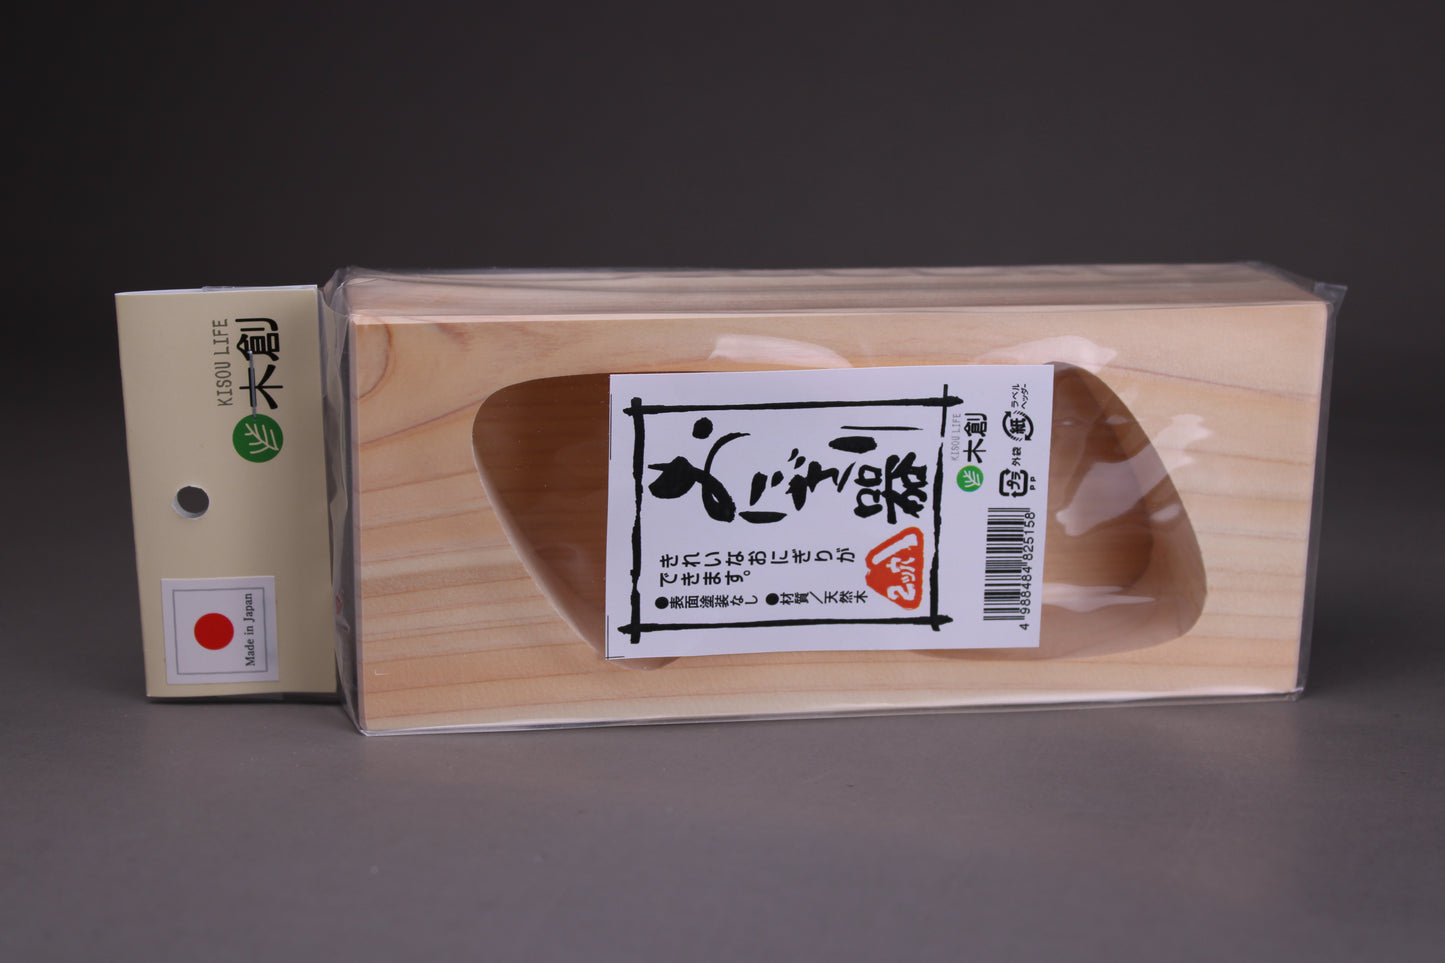 onigiri 2 hole rice mold with packaging showing kanji describing item size use and materials made by yamacoh in japan 